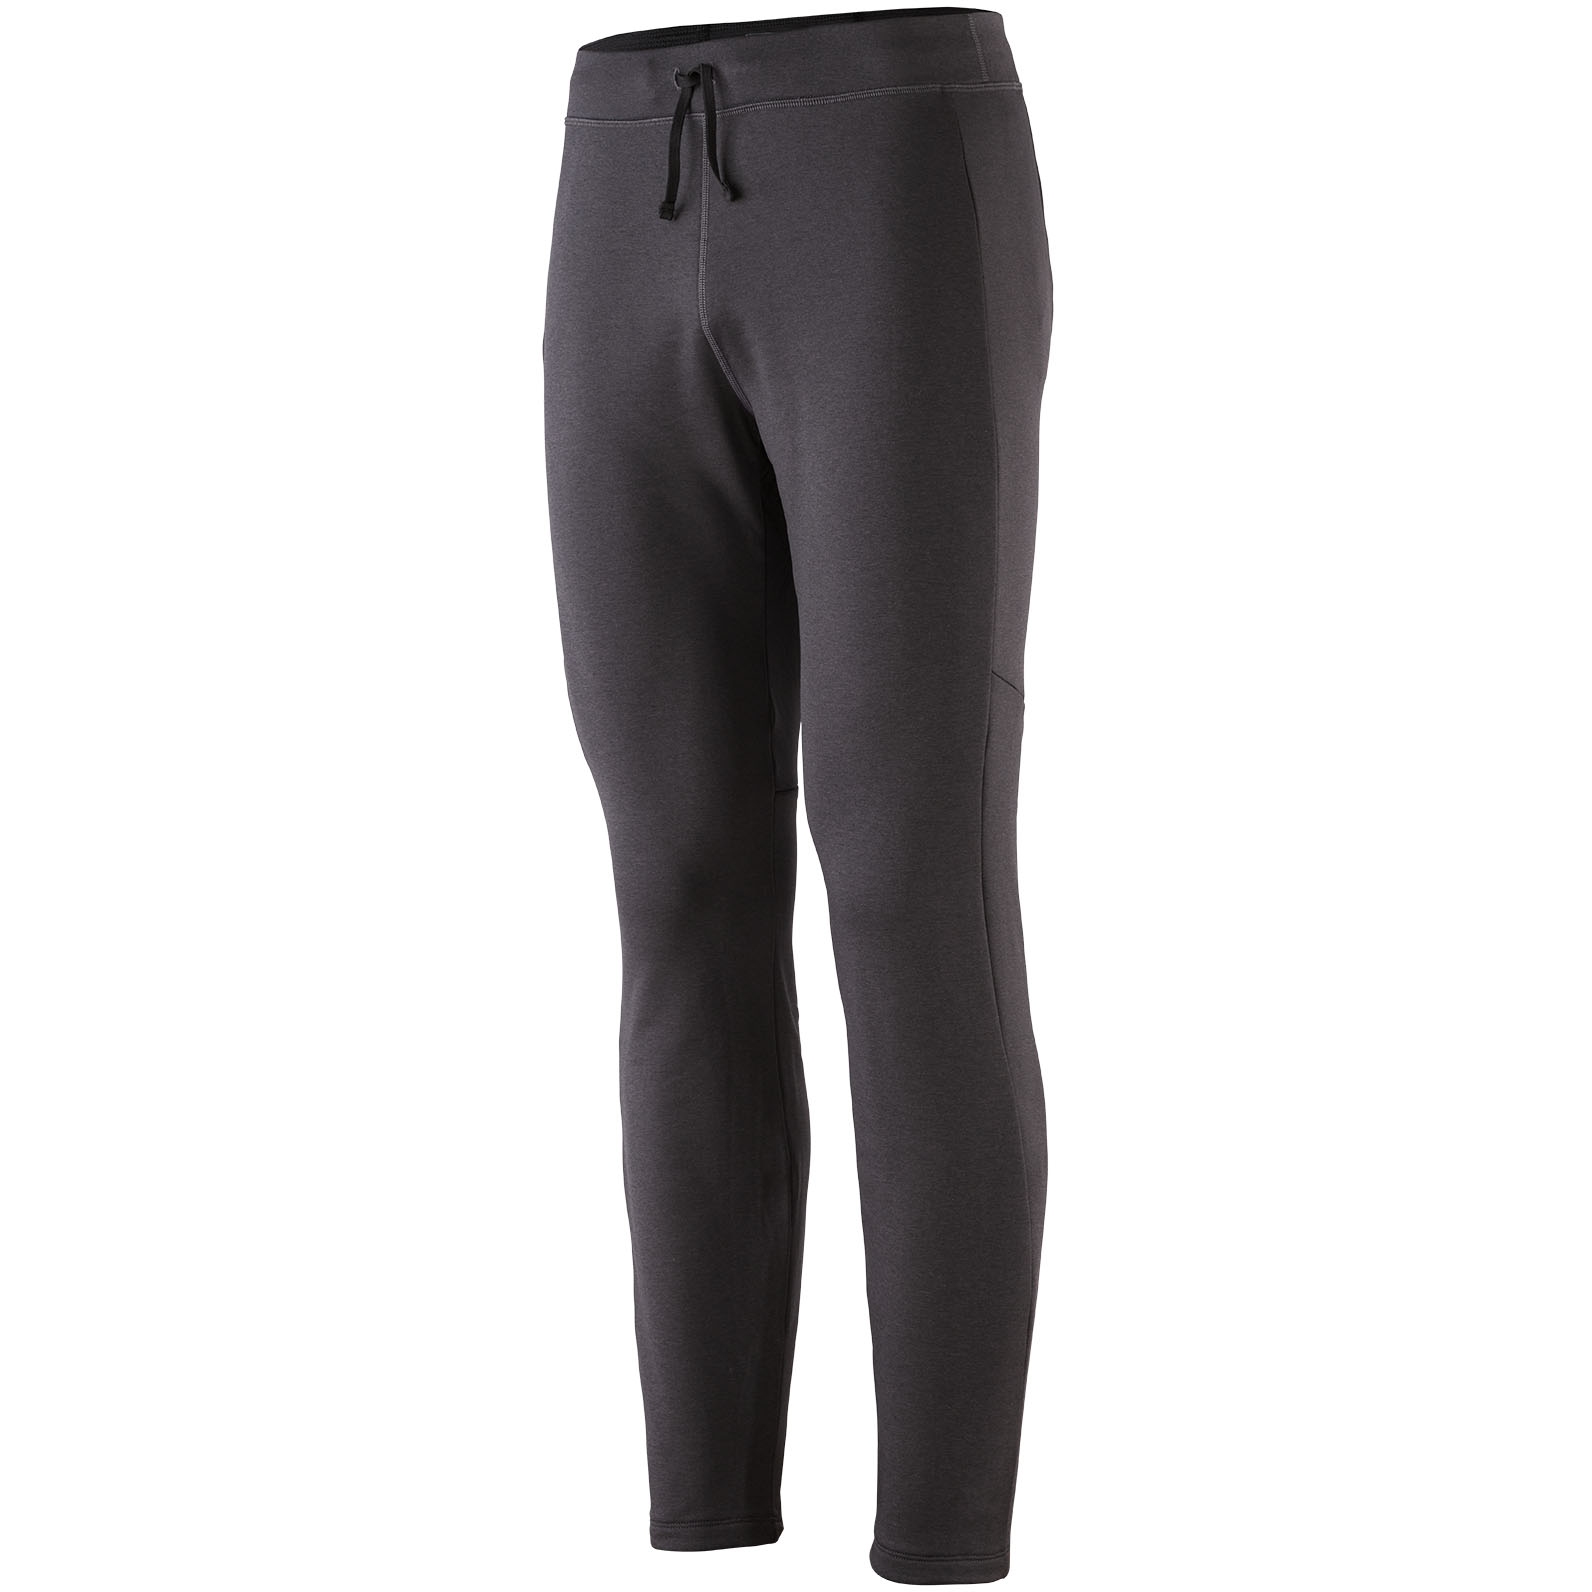 Picture of Patagonia R1 Daily Bottoms Pants - Ink Black - Black X-Dye